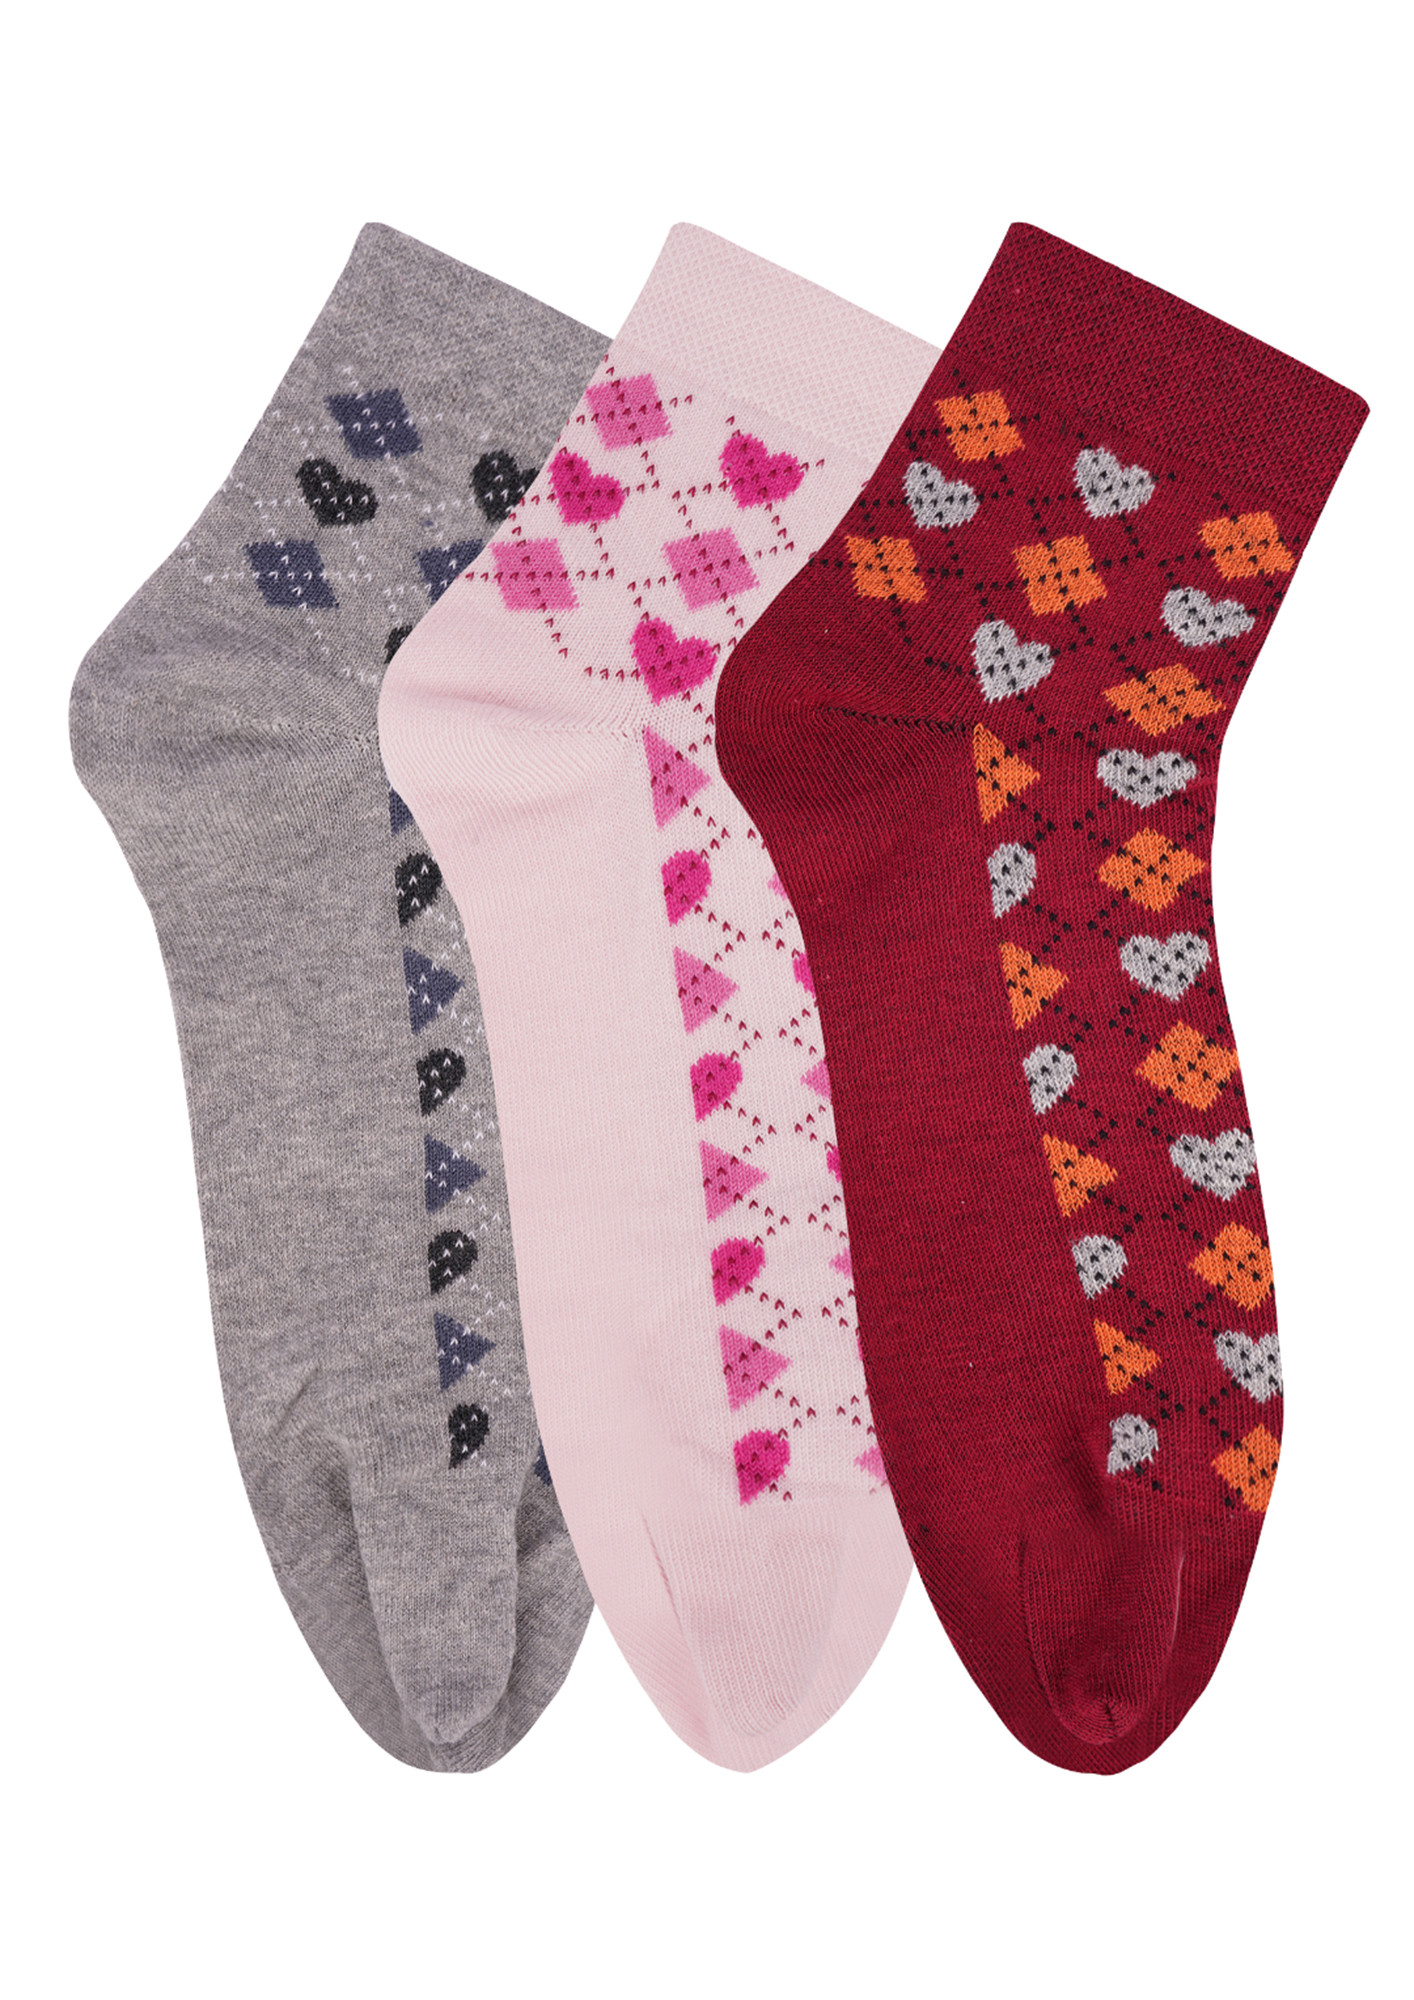 N2S NEXT2SKIN Women's Low Ankle Length Cotton Argyle Pattern Thumb Socks (Pack of 3) (Grey:Pink:Red)